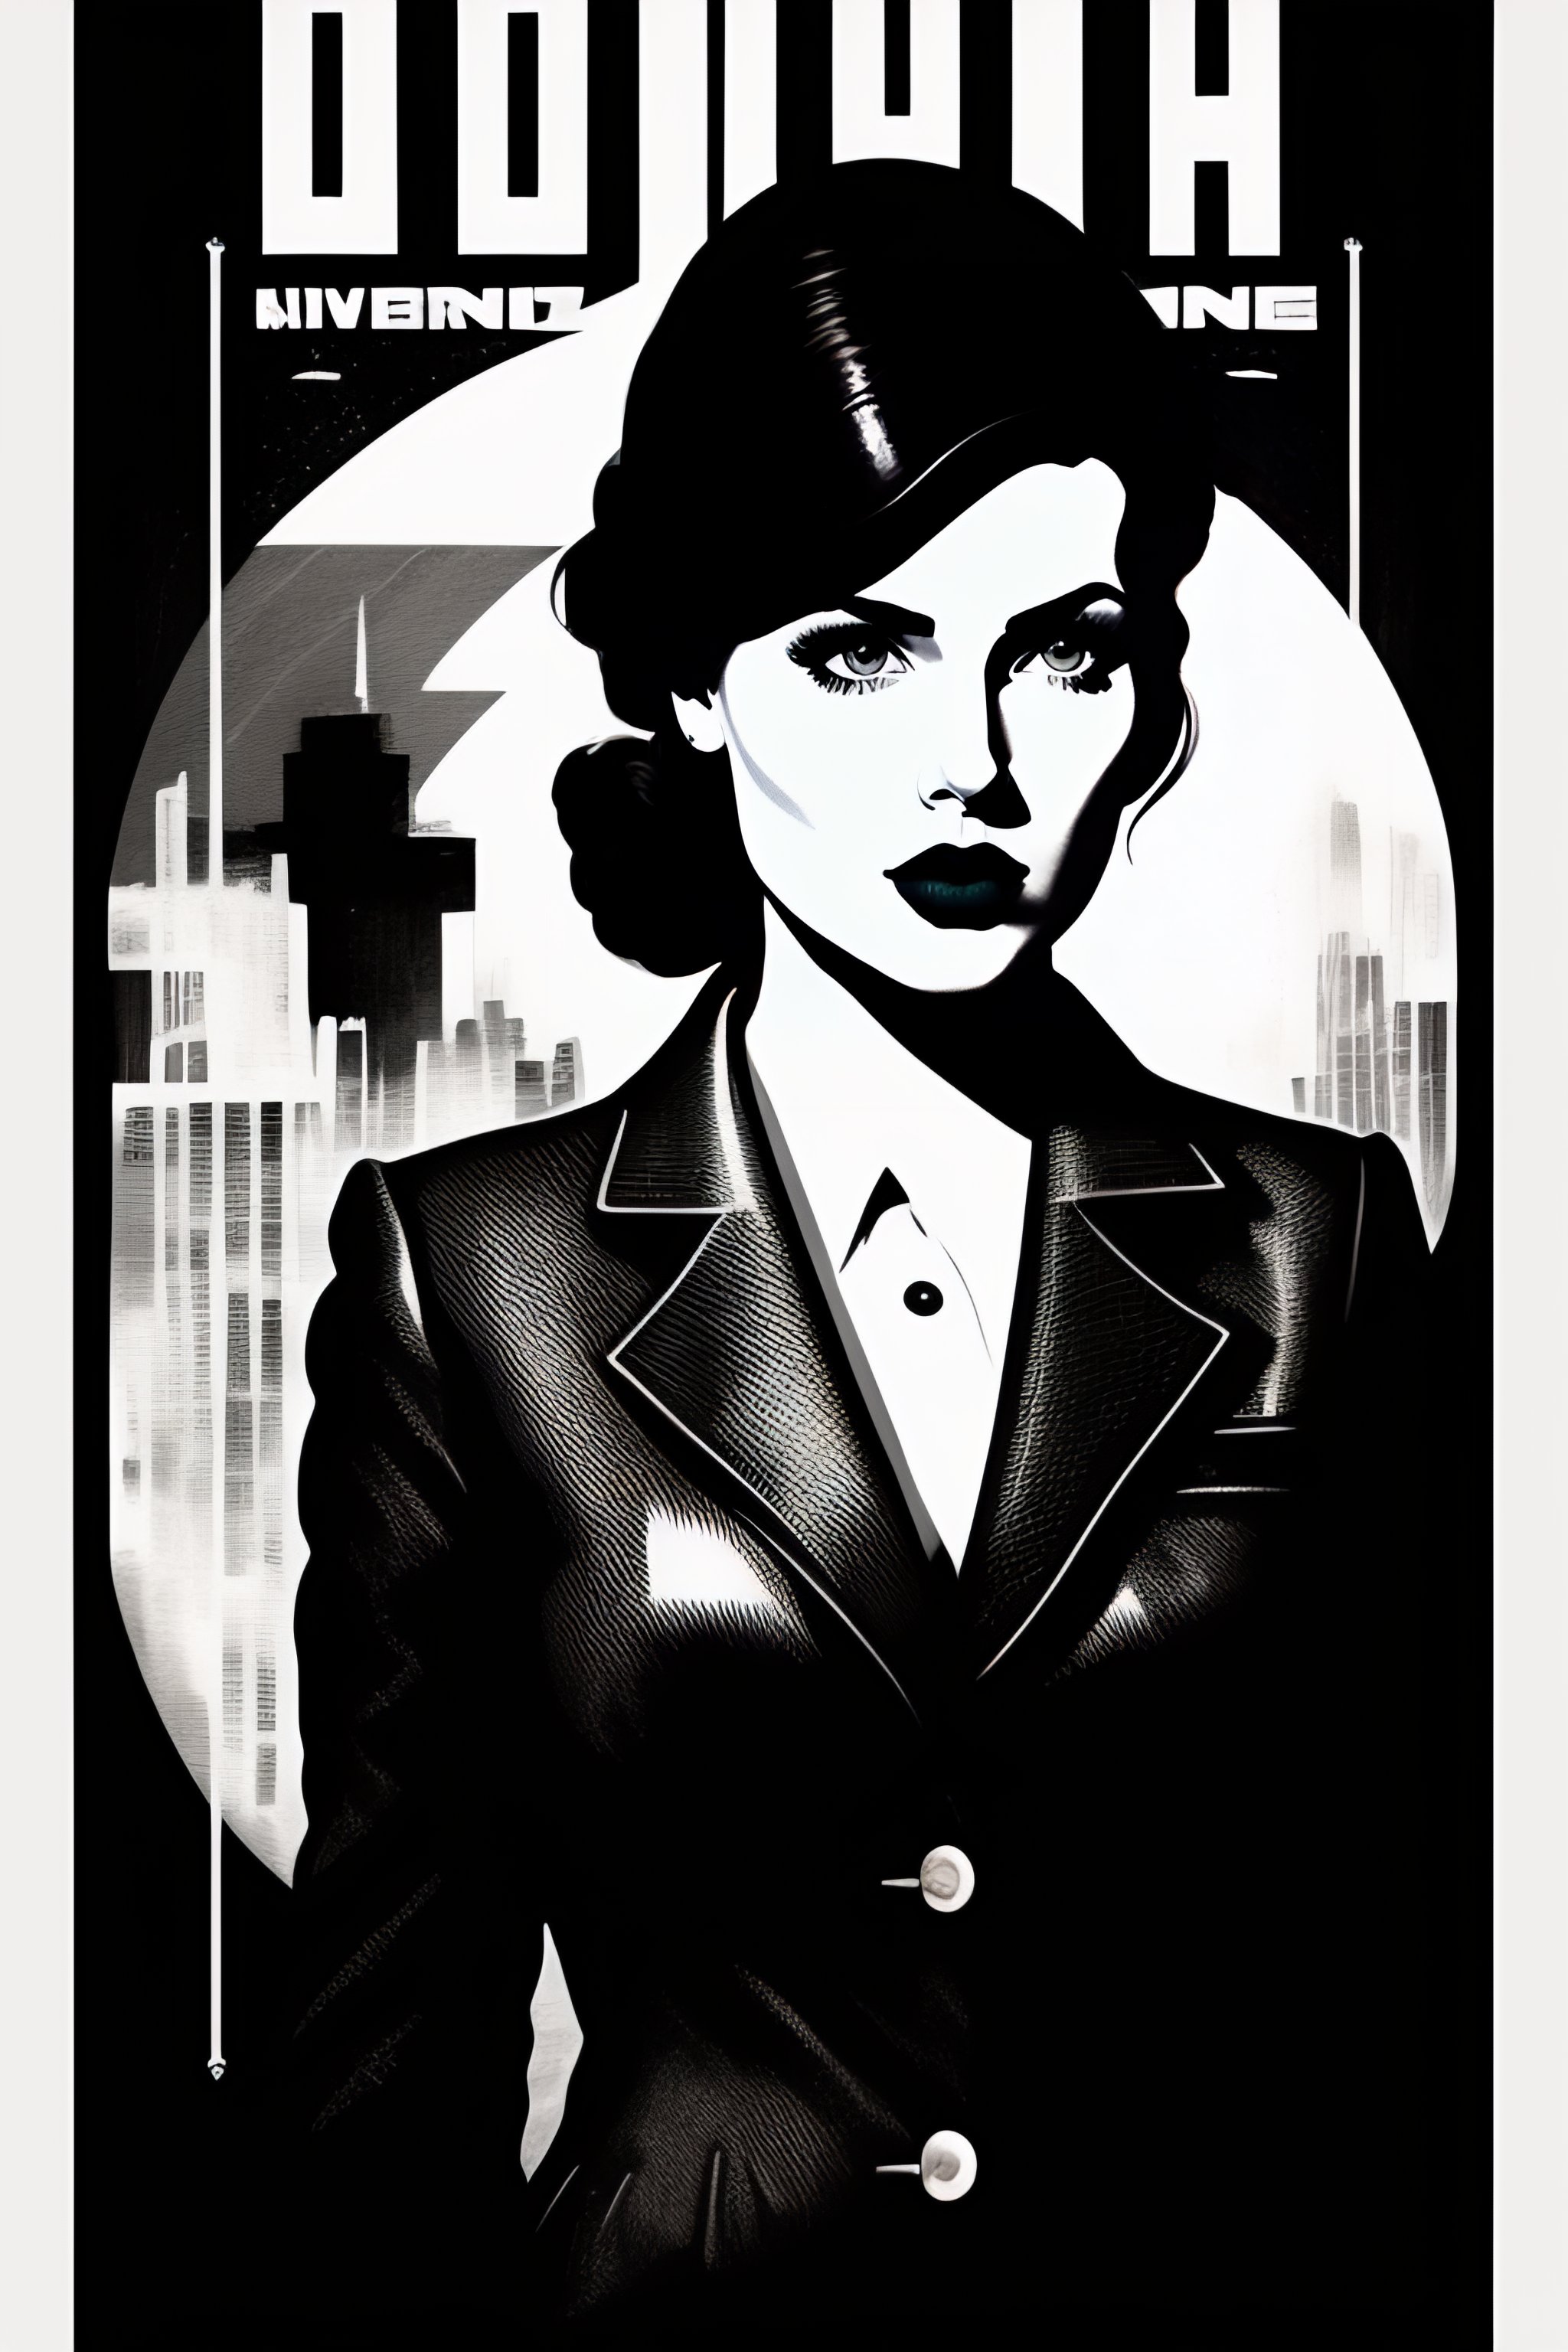 The noir film poster that inspired the art of burial at sea : r/Bioshock